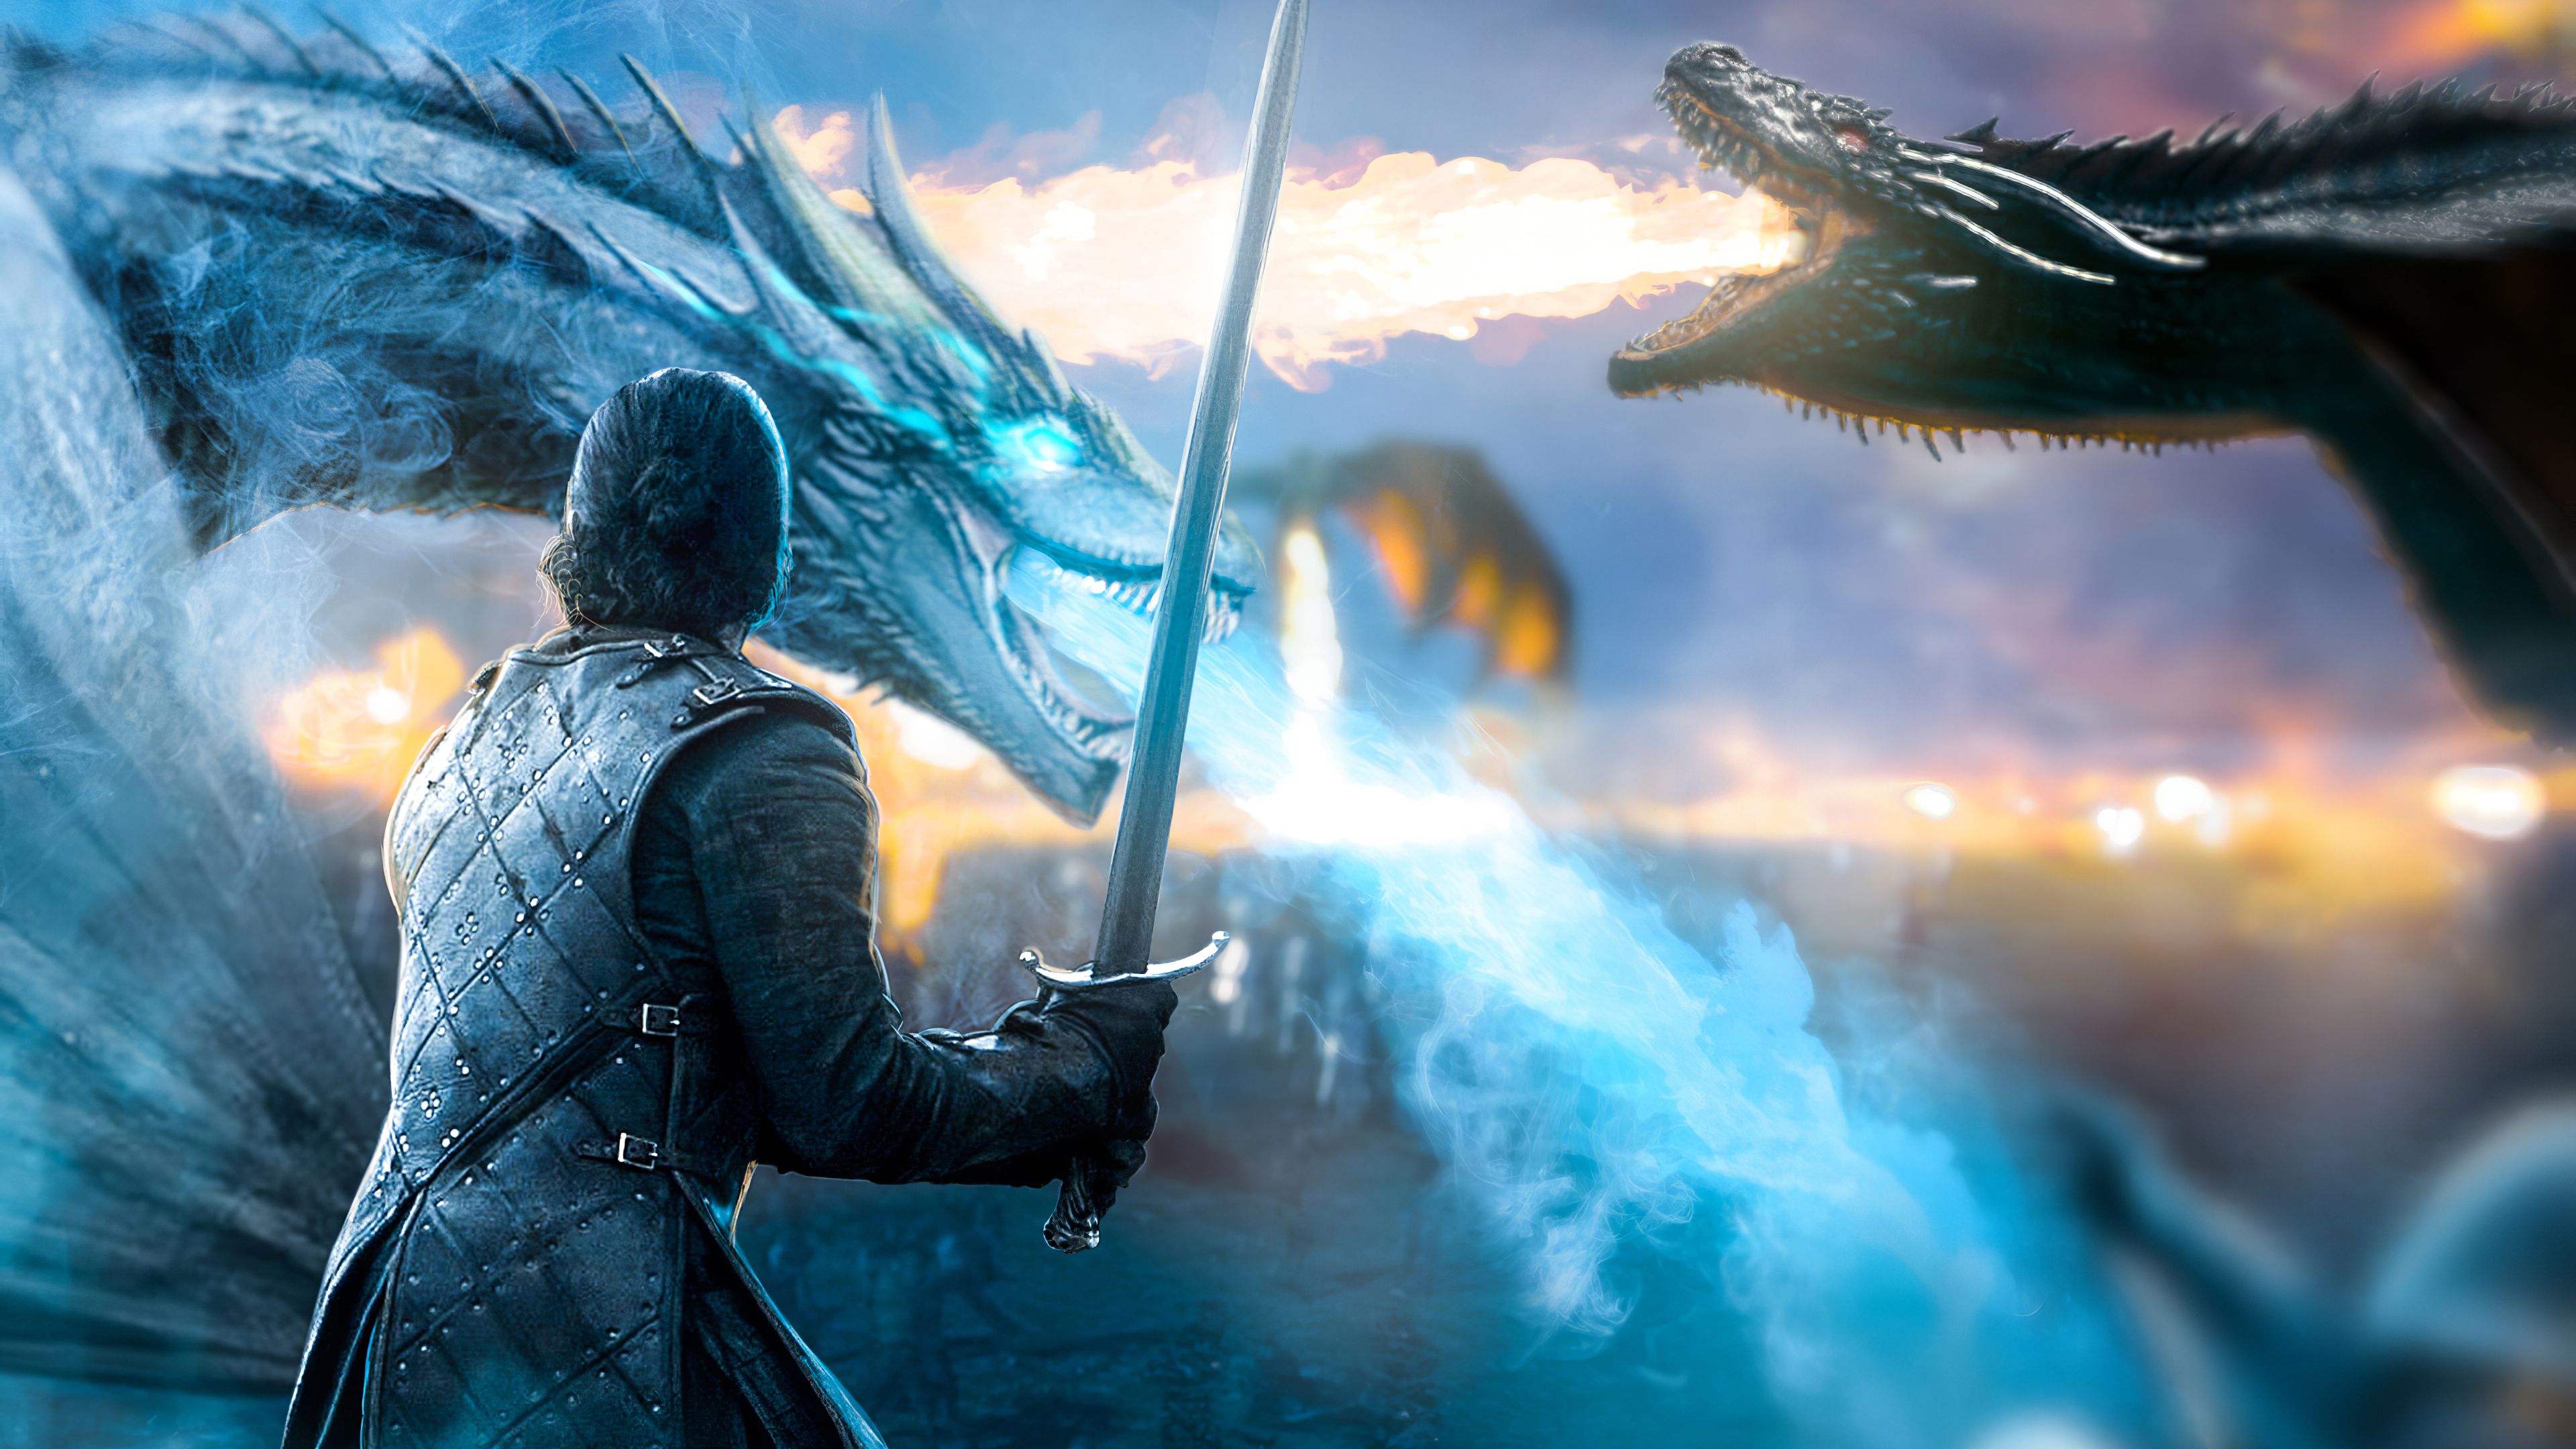 Discover 70+ game of thrones dragon wallpaper latest - in.cdgdbentre